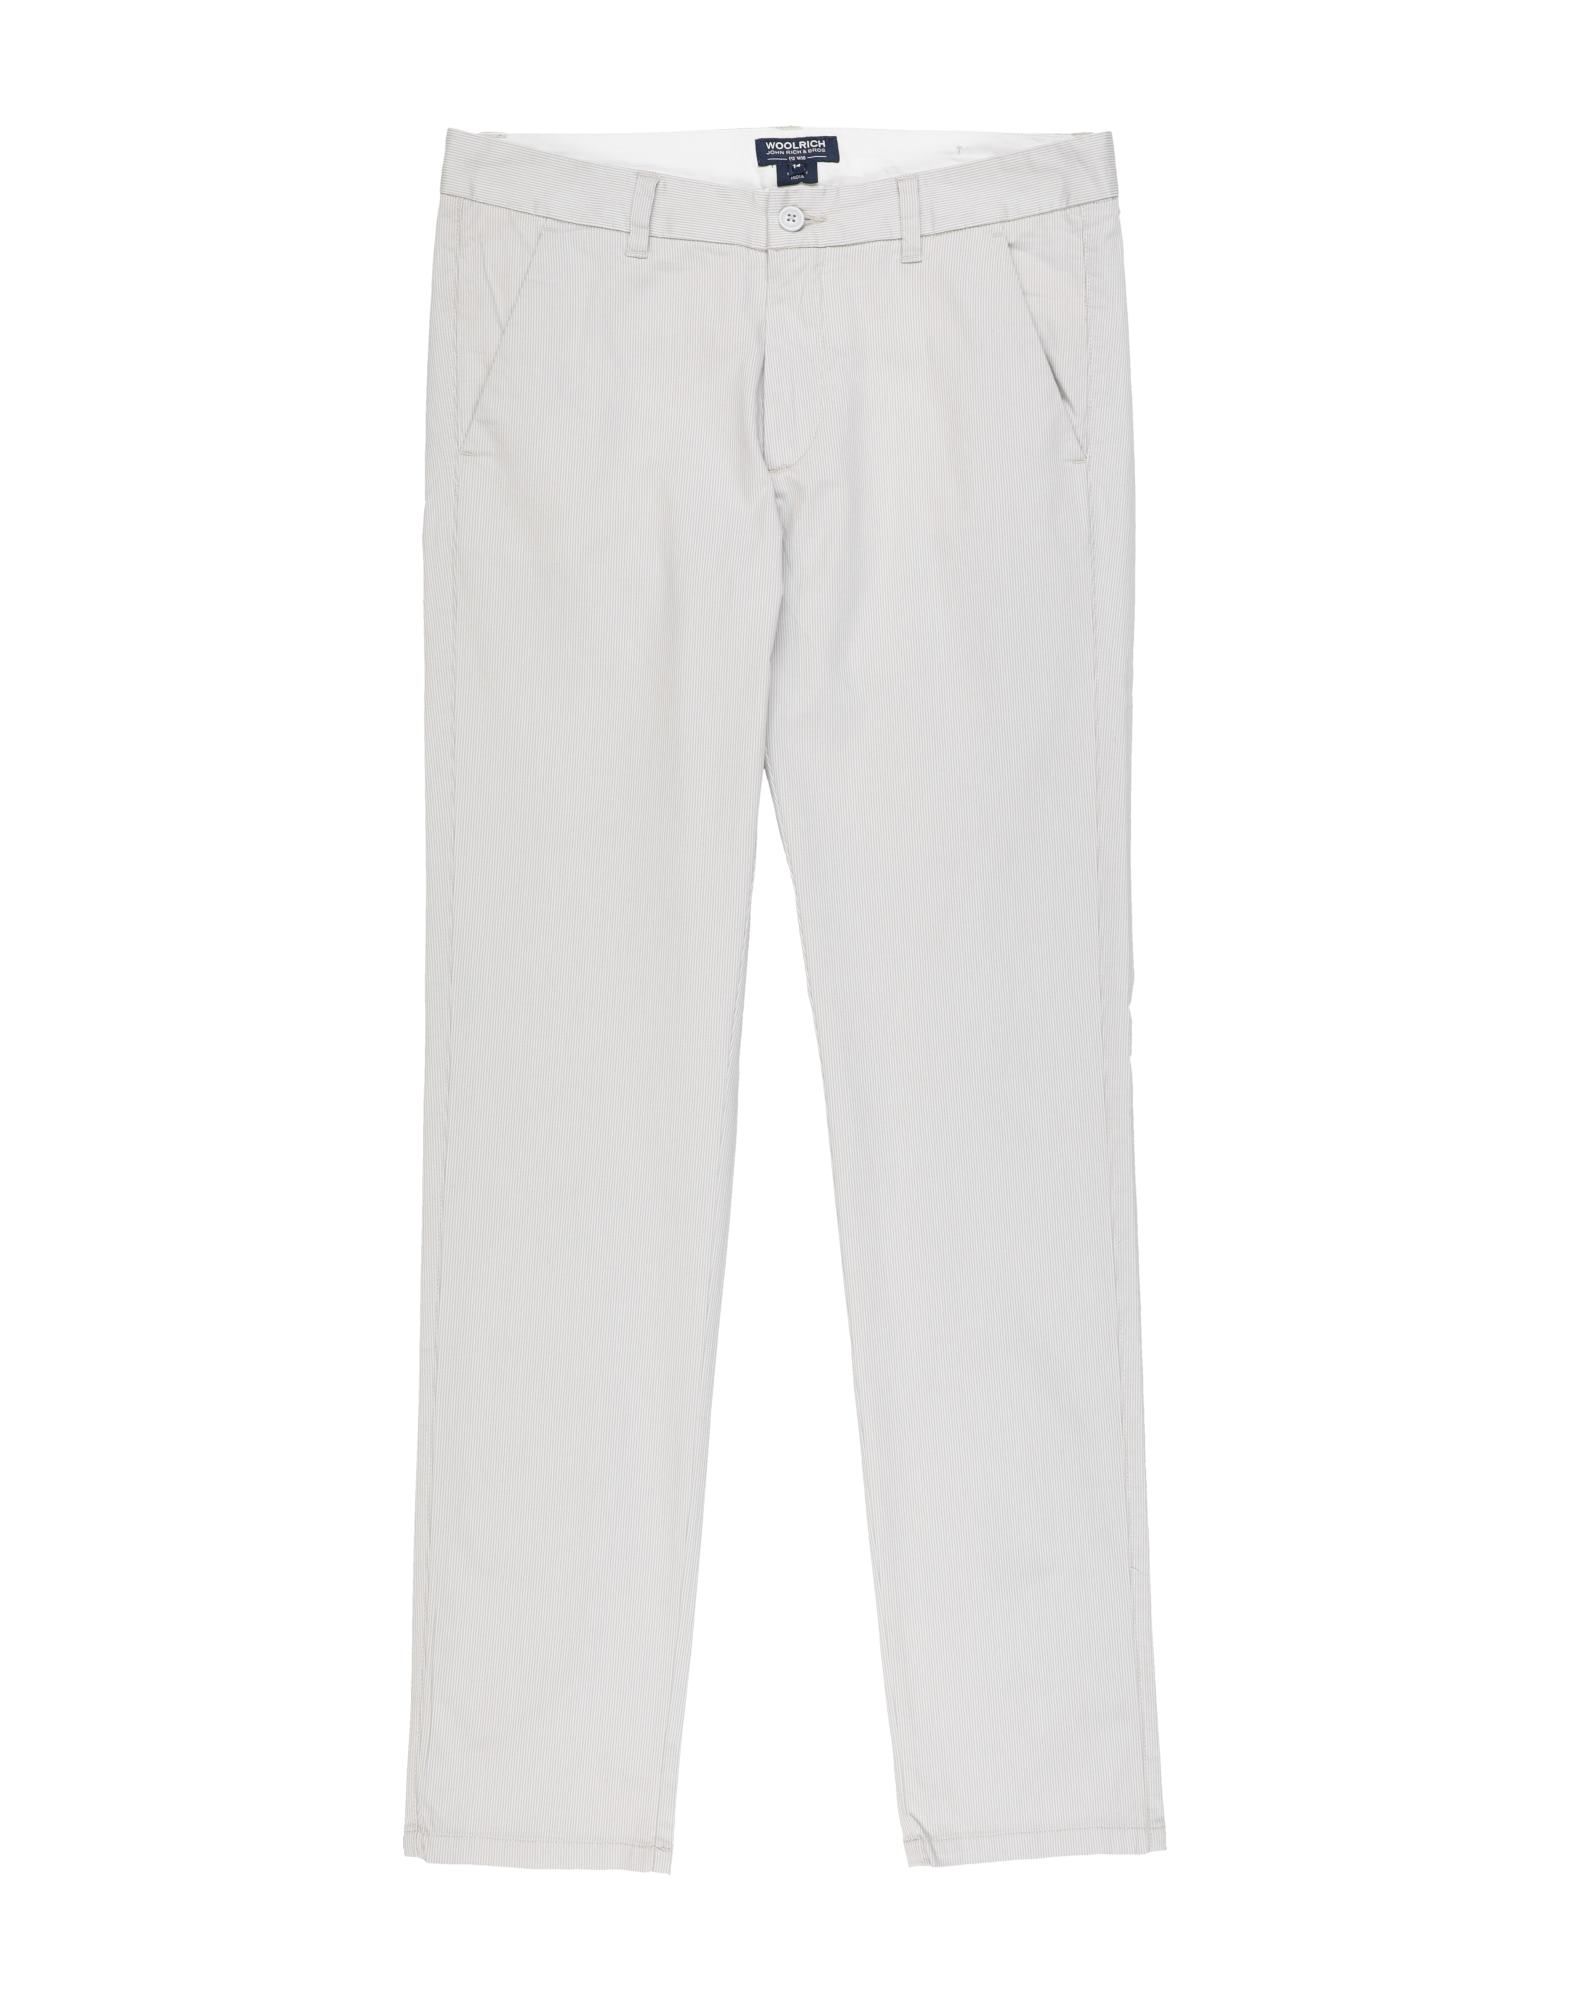 Fred Mello Kids' Pants In White